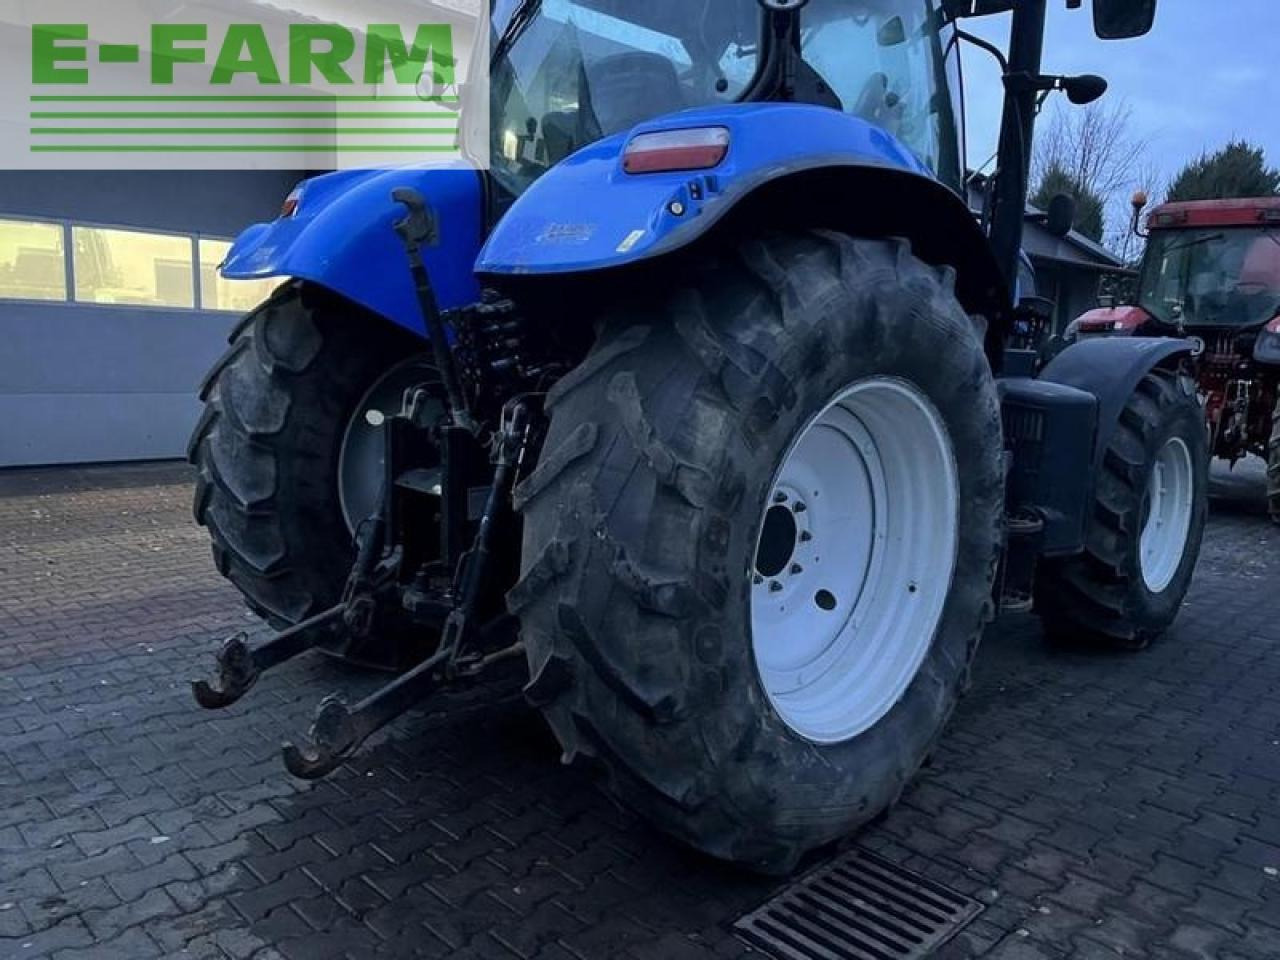 Tracteur agricole New Holland t7.185 power command: photos 4